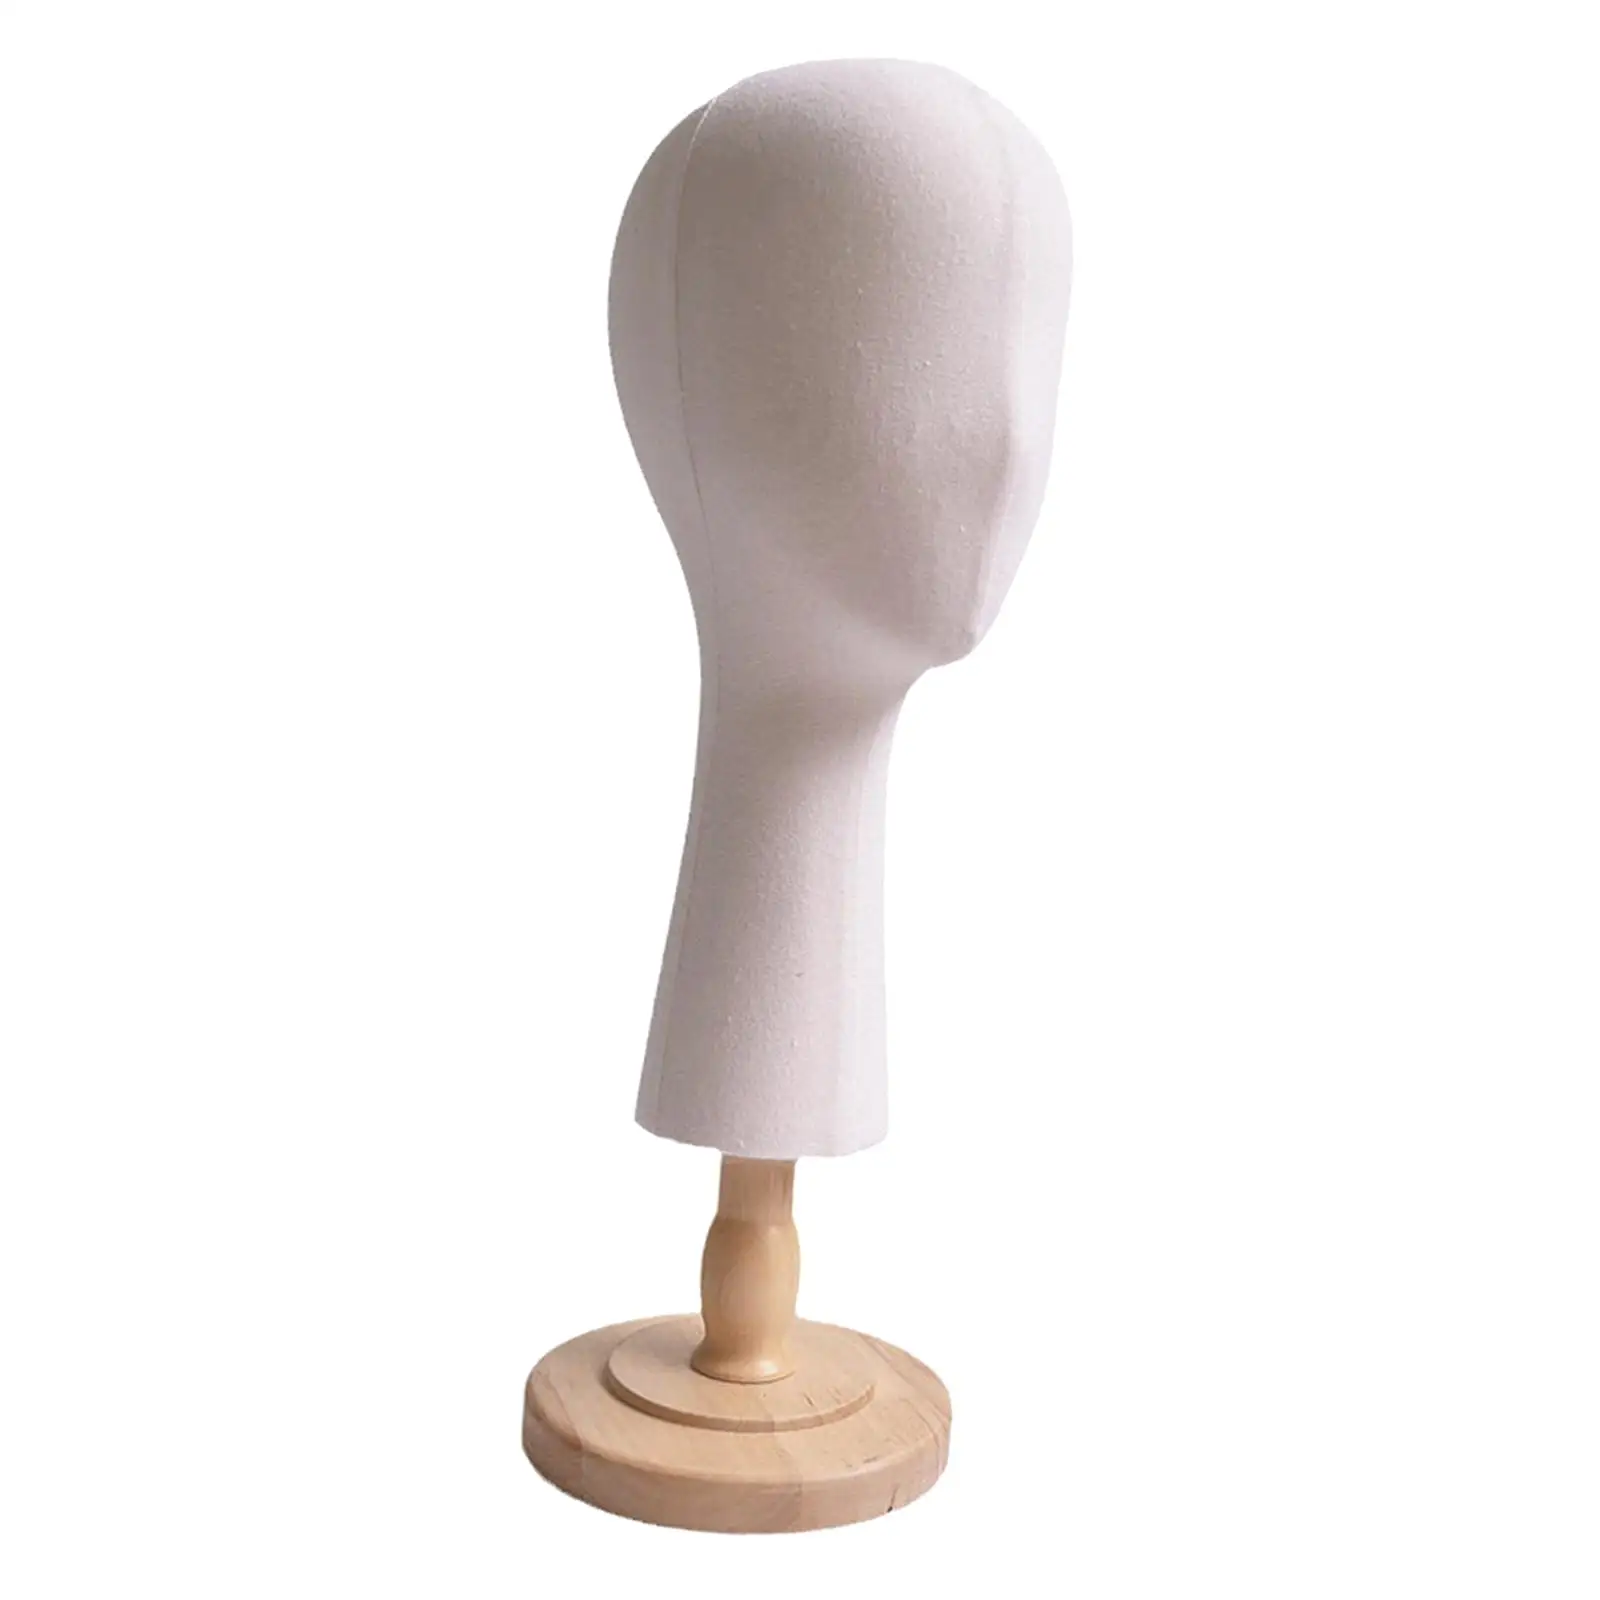 Mannequin Manikin Head Lightweight Stable Versatile Easy to Use Hair Head Stand for Display Styling Caps Headset Hairpieces